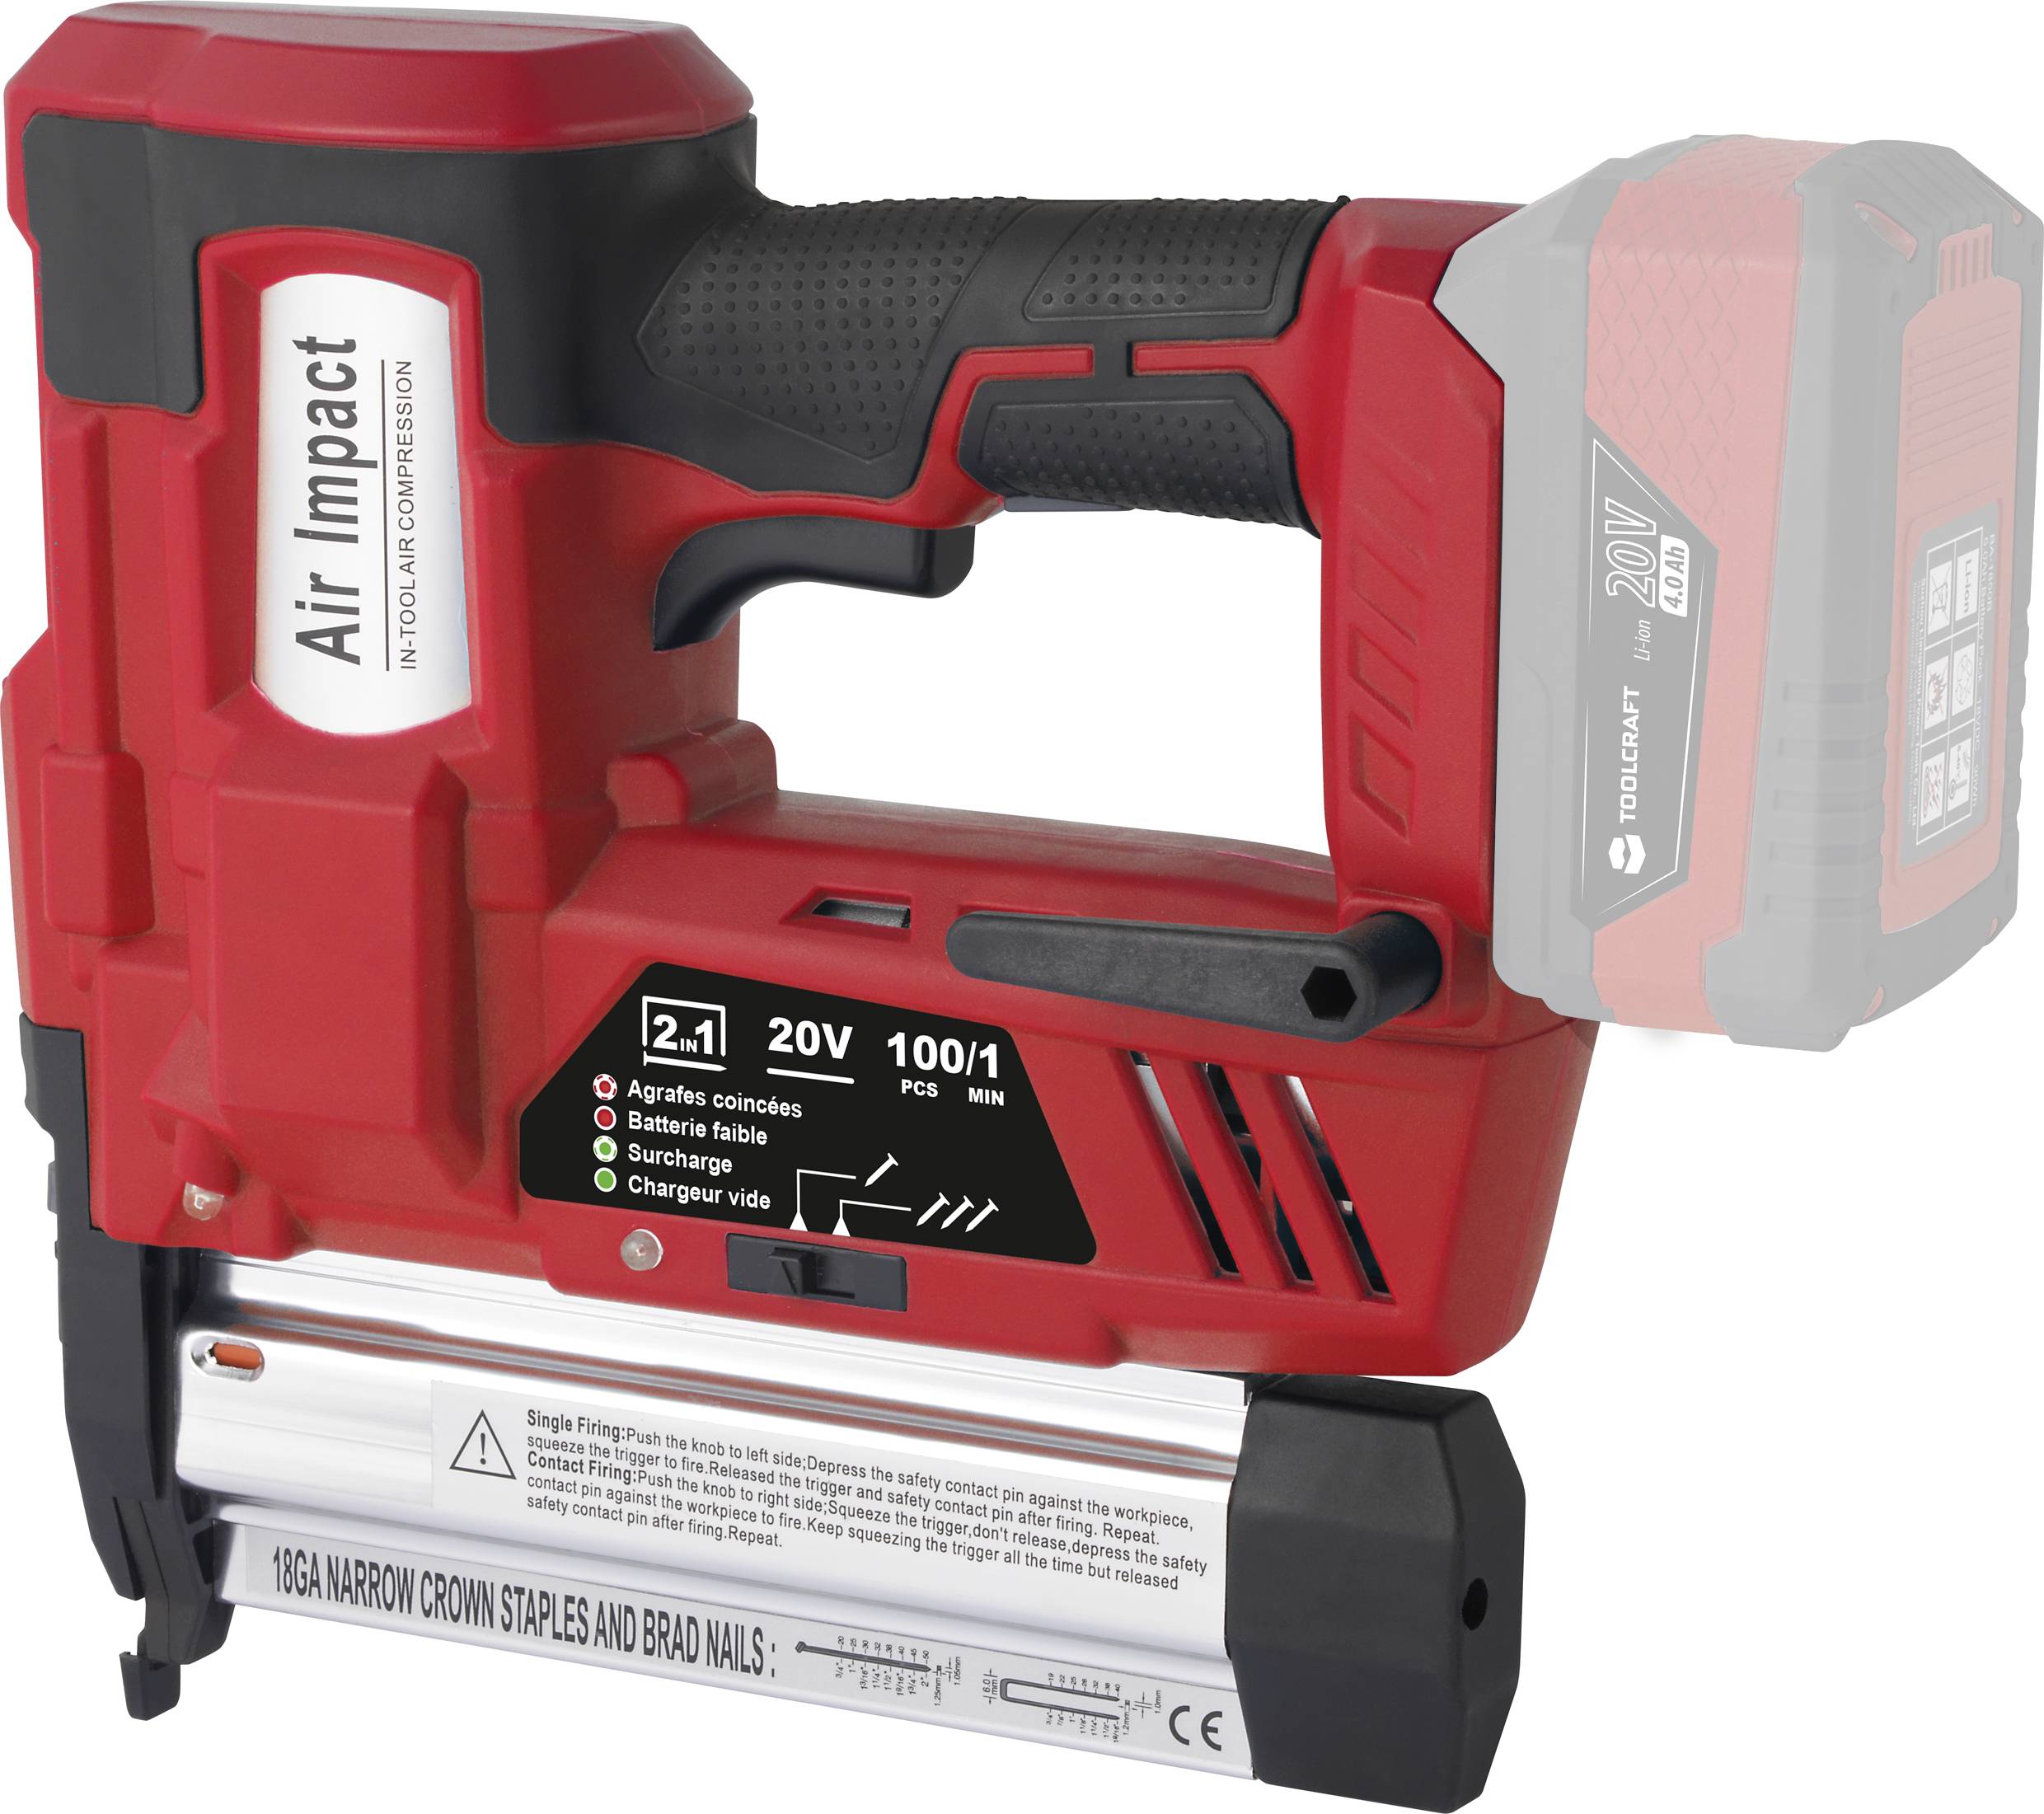 Nail & Staple Gun is a top rental on Cloud of Goods. Simply reserve your  Nail & Staple Gun rental online and we'll deliver. We deliver Nail & Staple  Gun rentals to